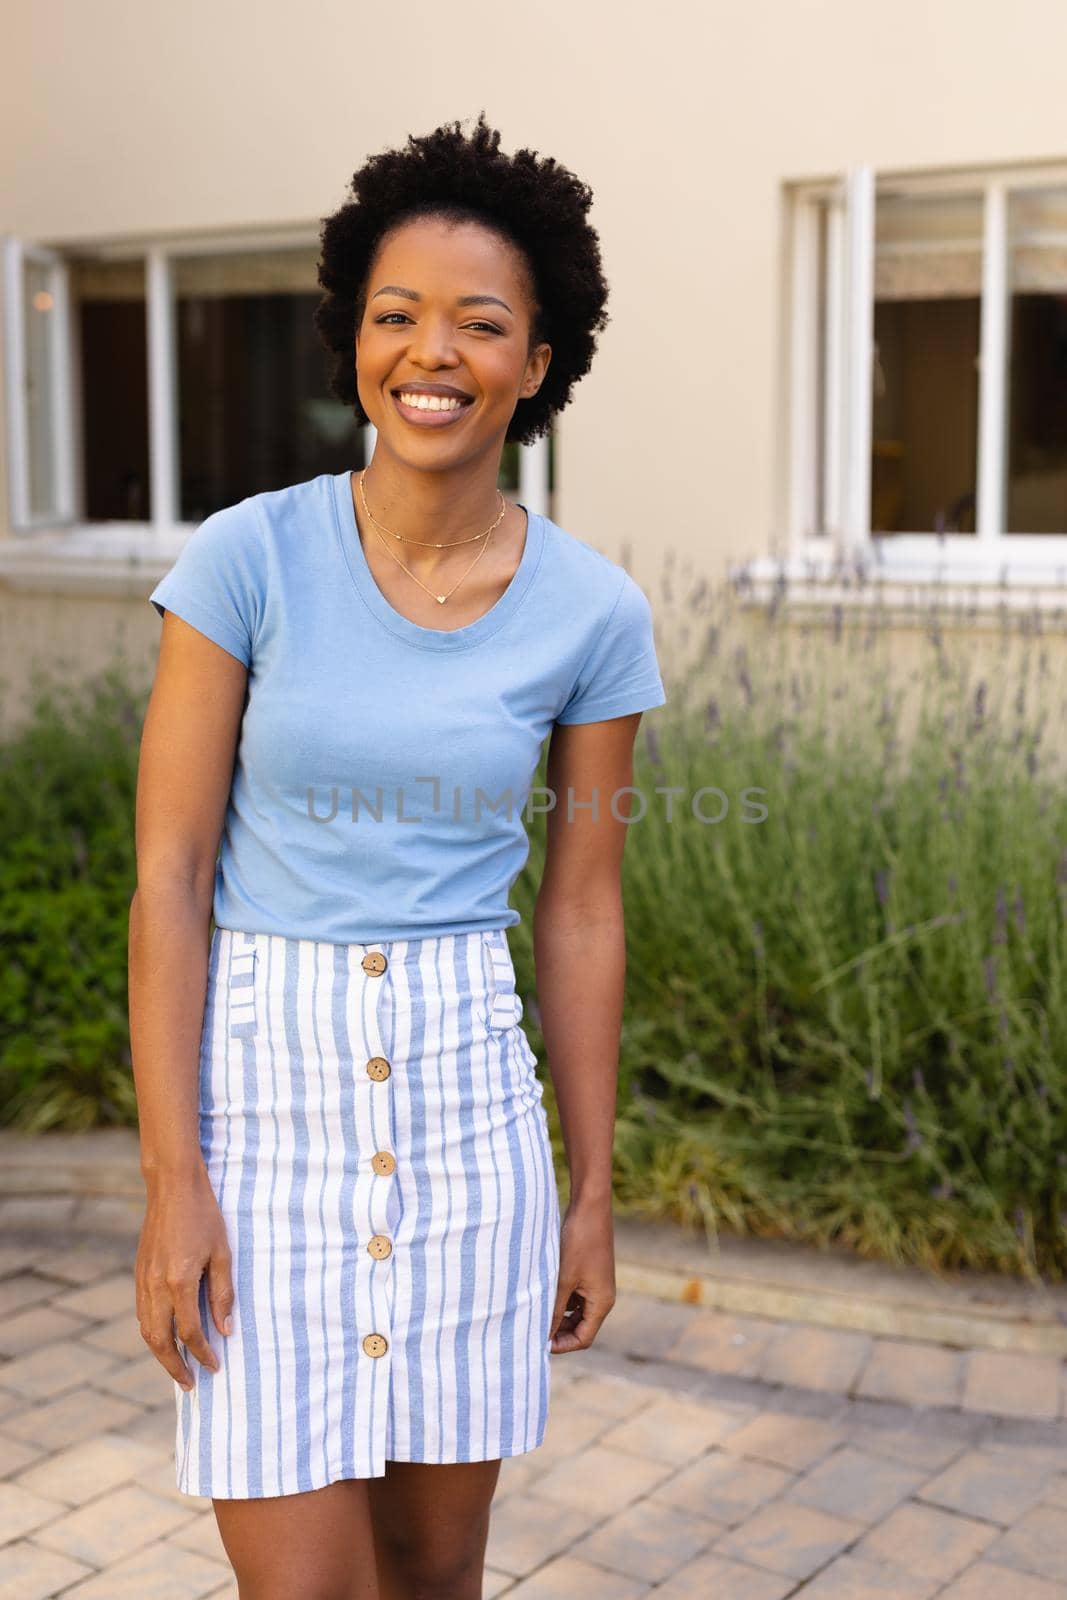 Portrait of happy african american young woman smiling while standing outdoors. people and emotions concept, unaltered.